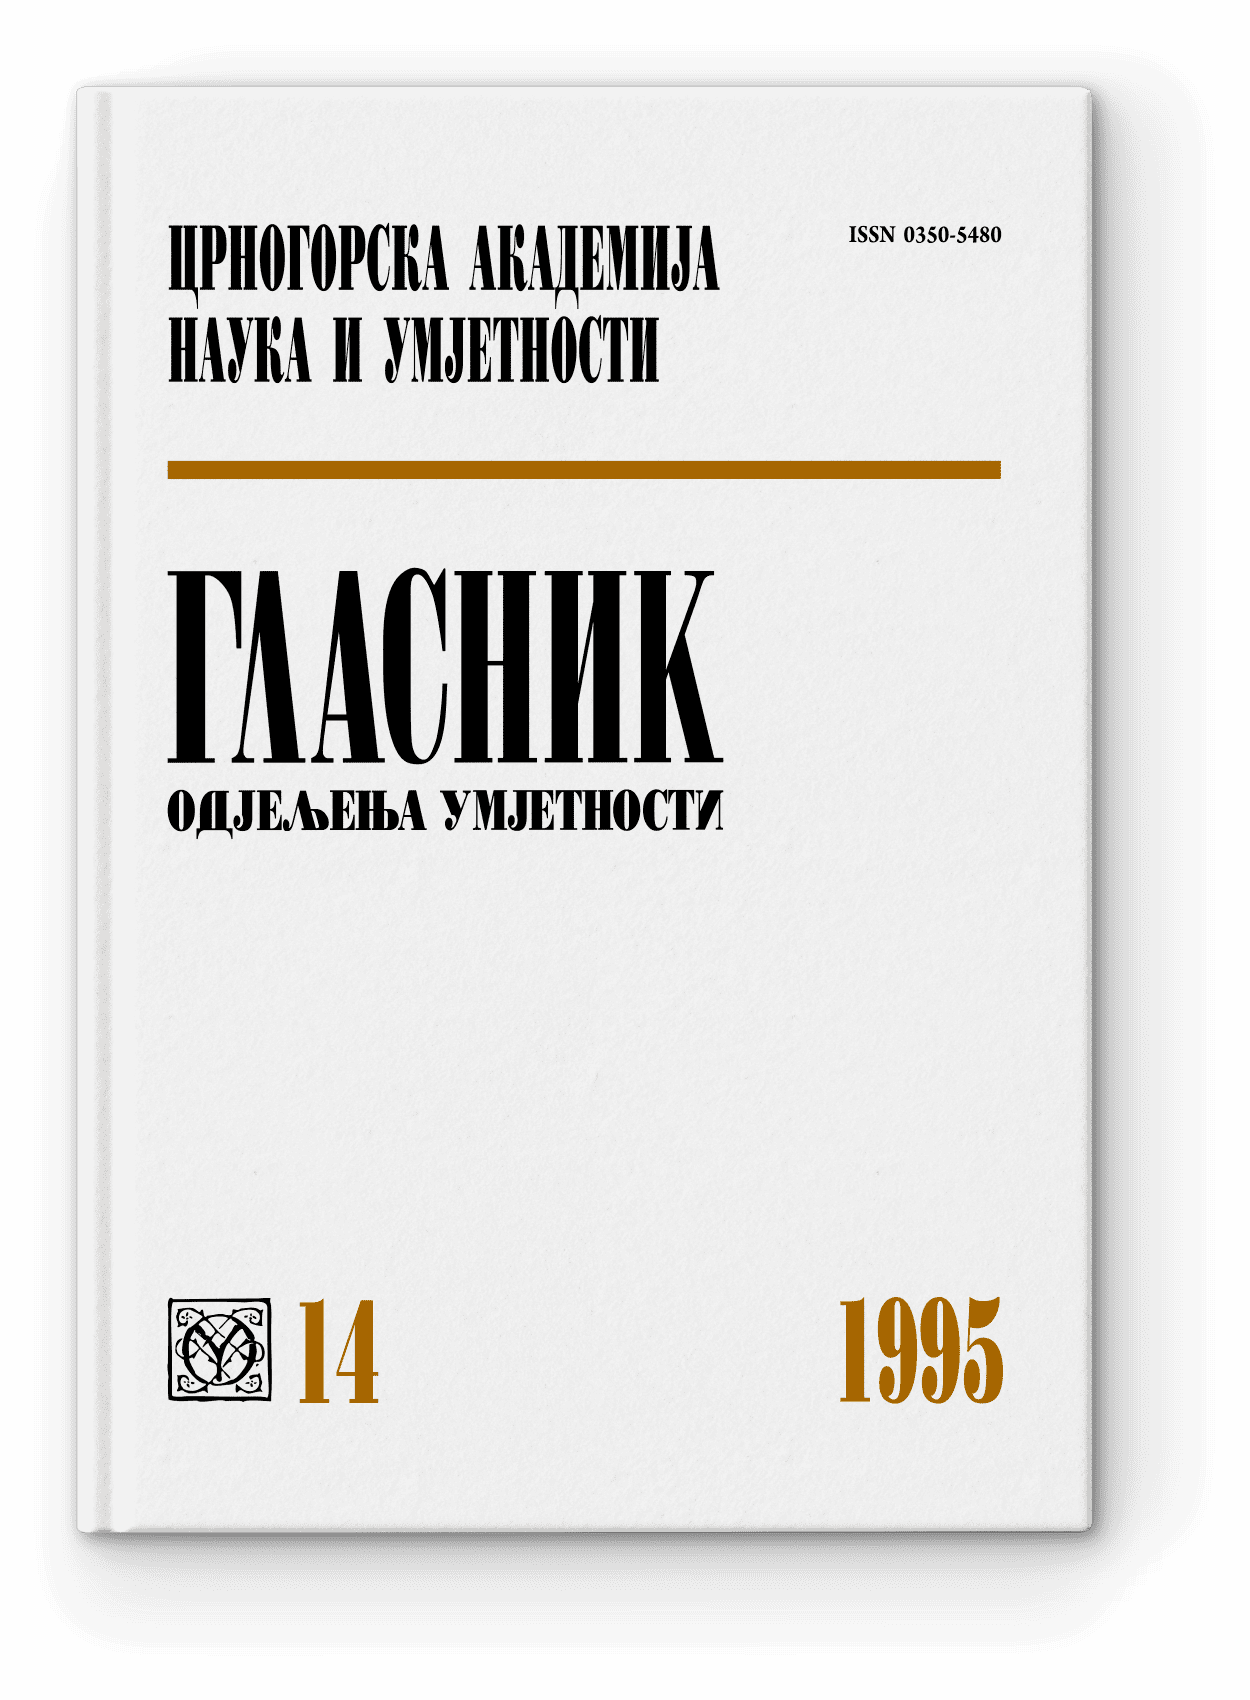 Proceedings of the Department of Arts, 14/1995